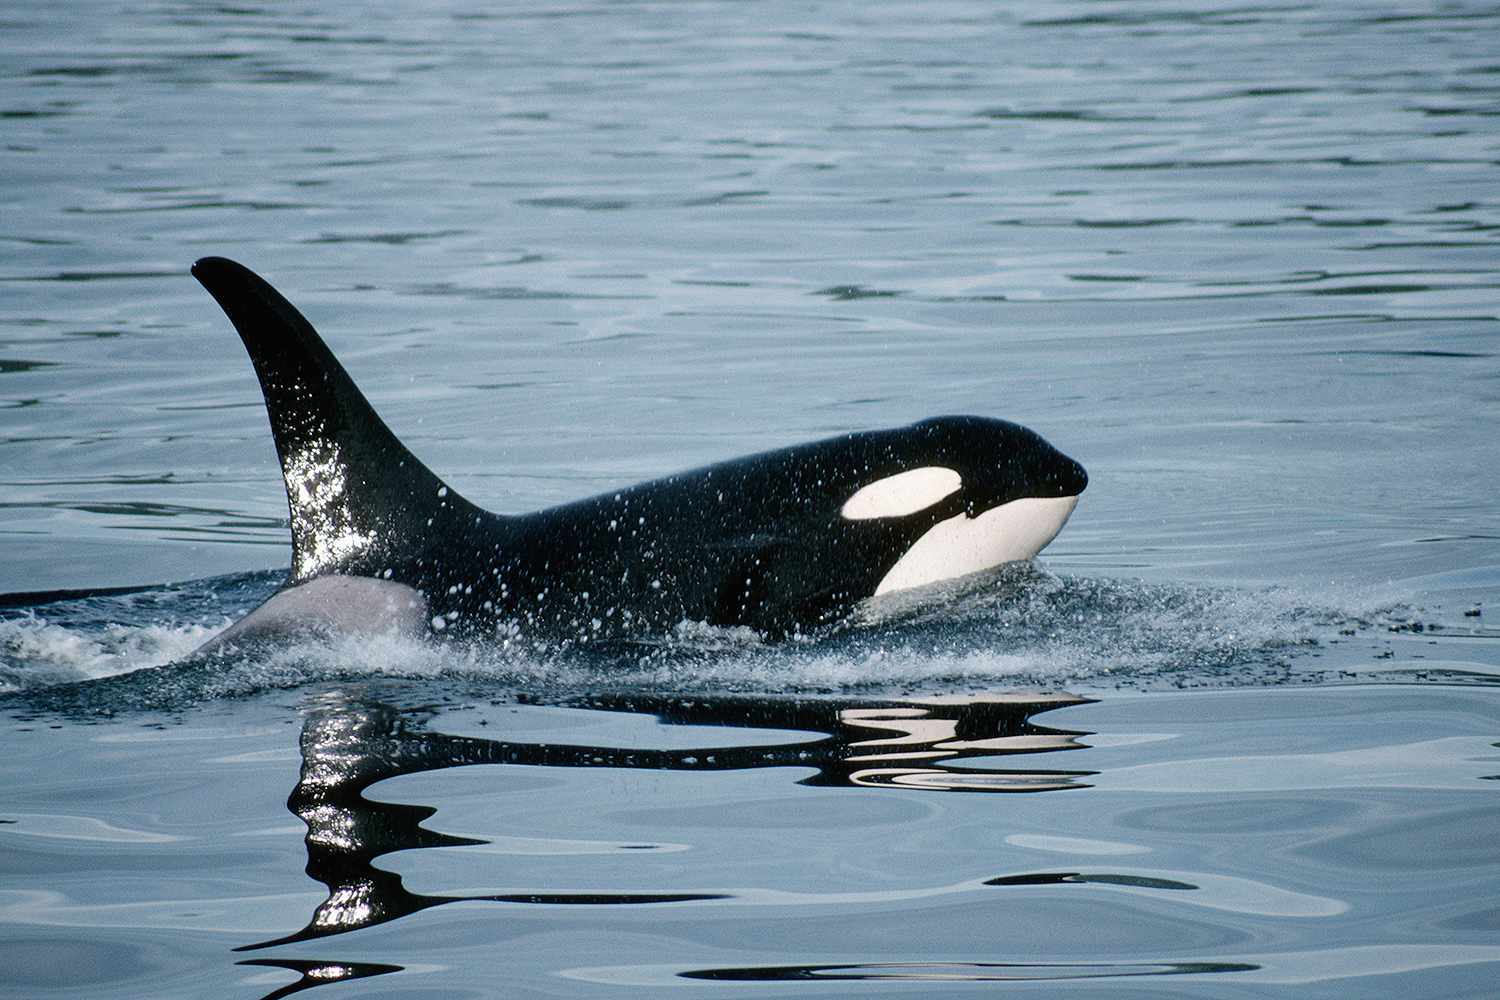 Man Fined for Attempting to 'Body Slam' Orca Whale in New Zealand: 'This Is Stupid Behavior'